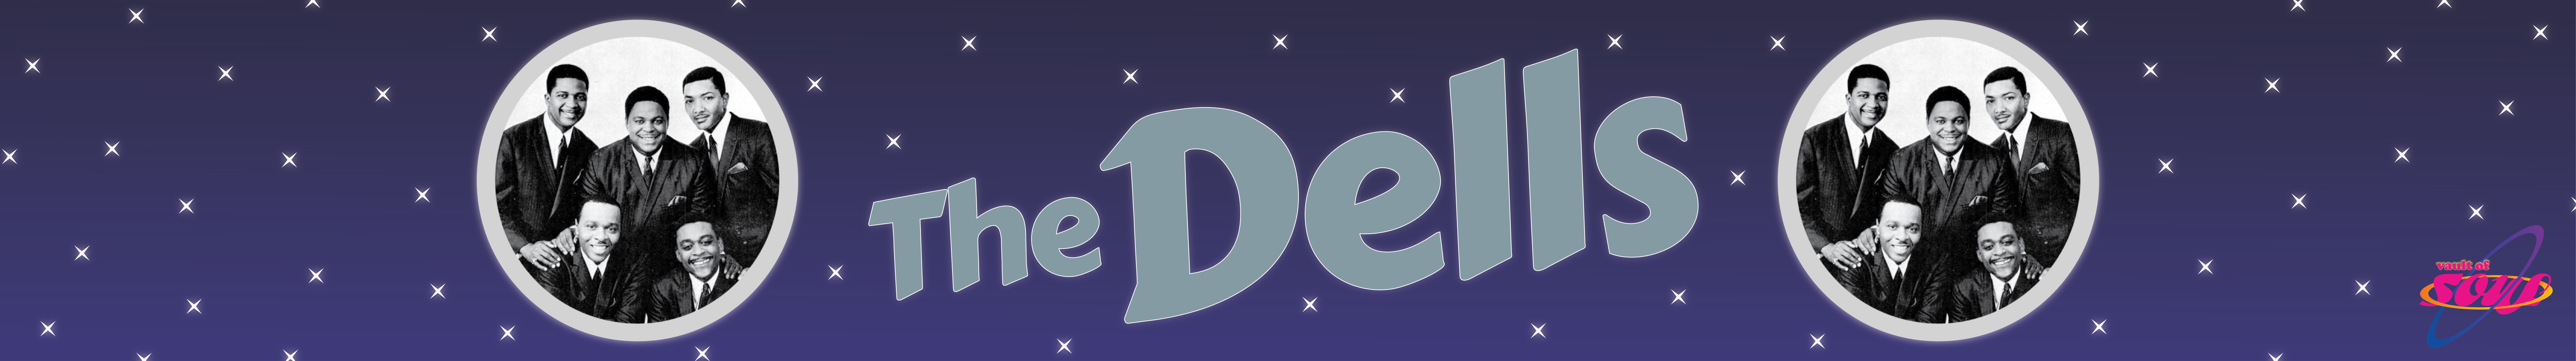 A circle cut-out picture of the Dells sits atop graphics of a starry night sky. A logo in the right corner reads "The Vault of Soul" and large centered text reads "The Dells."